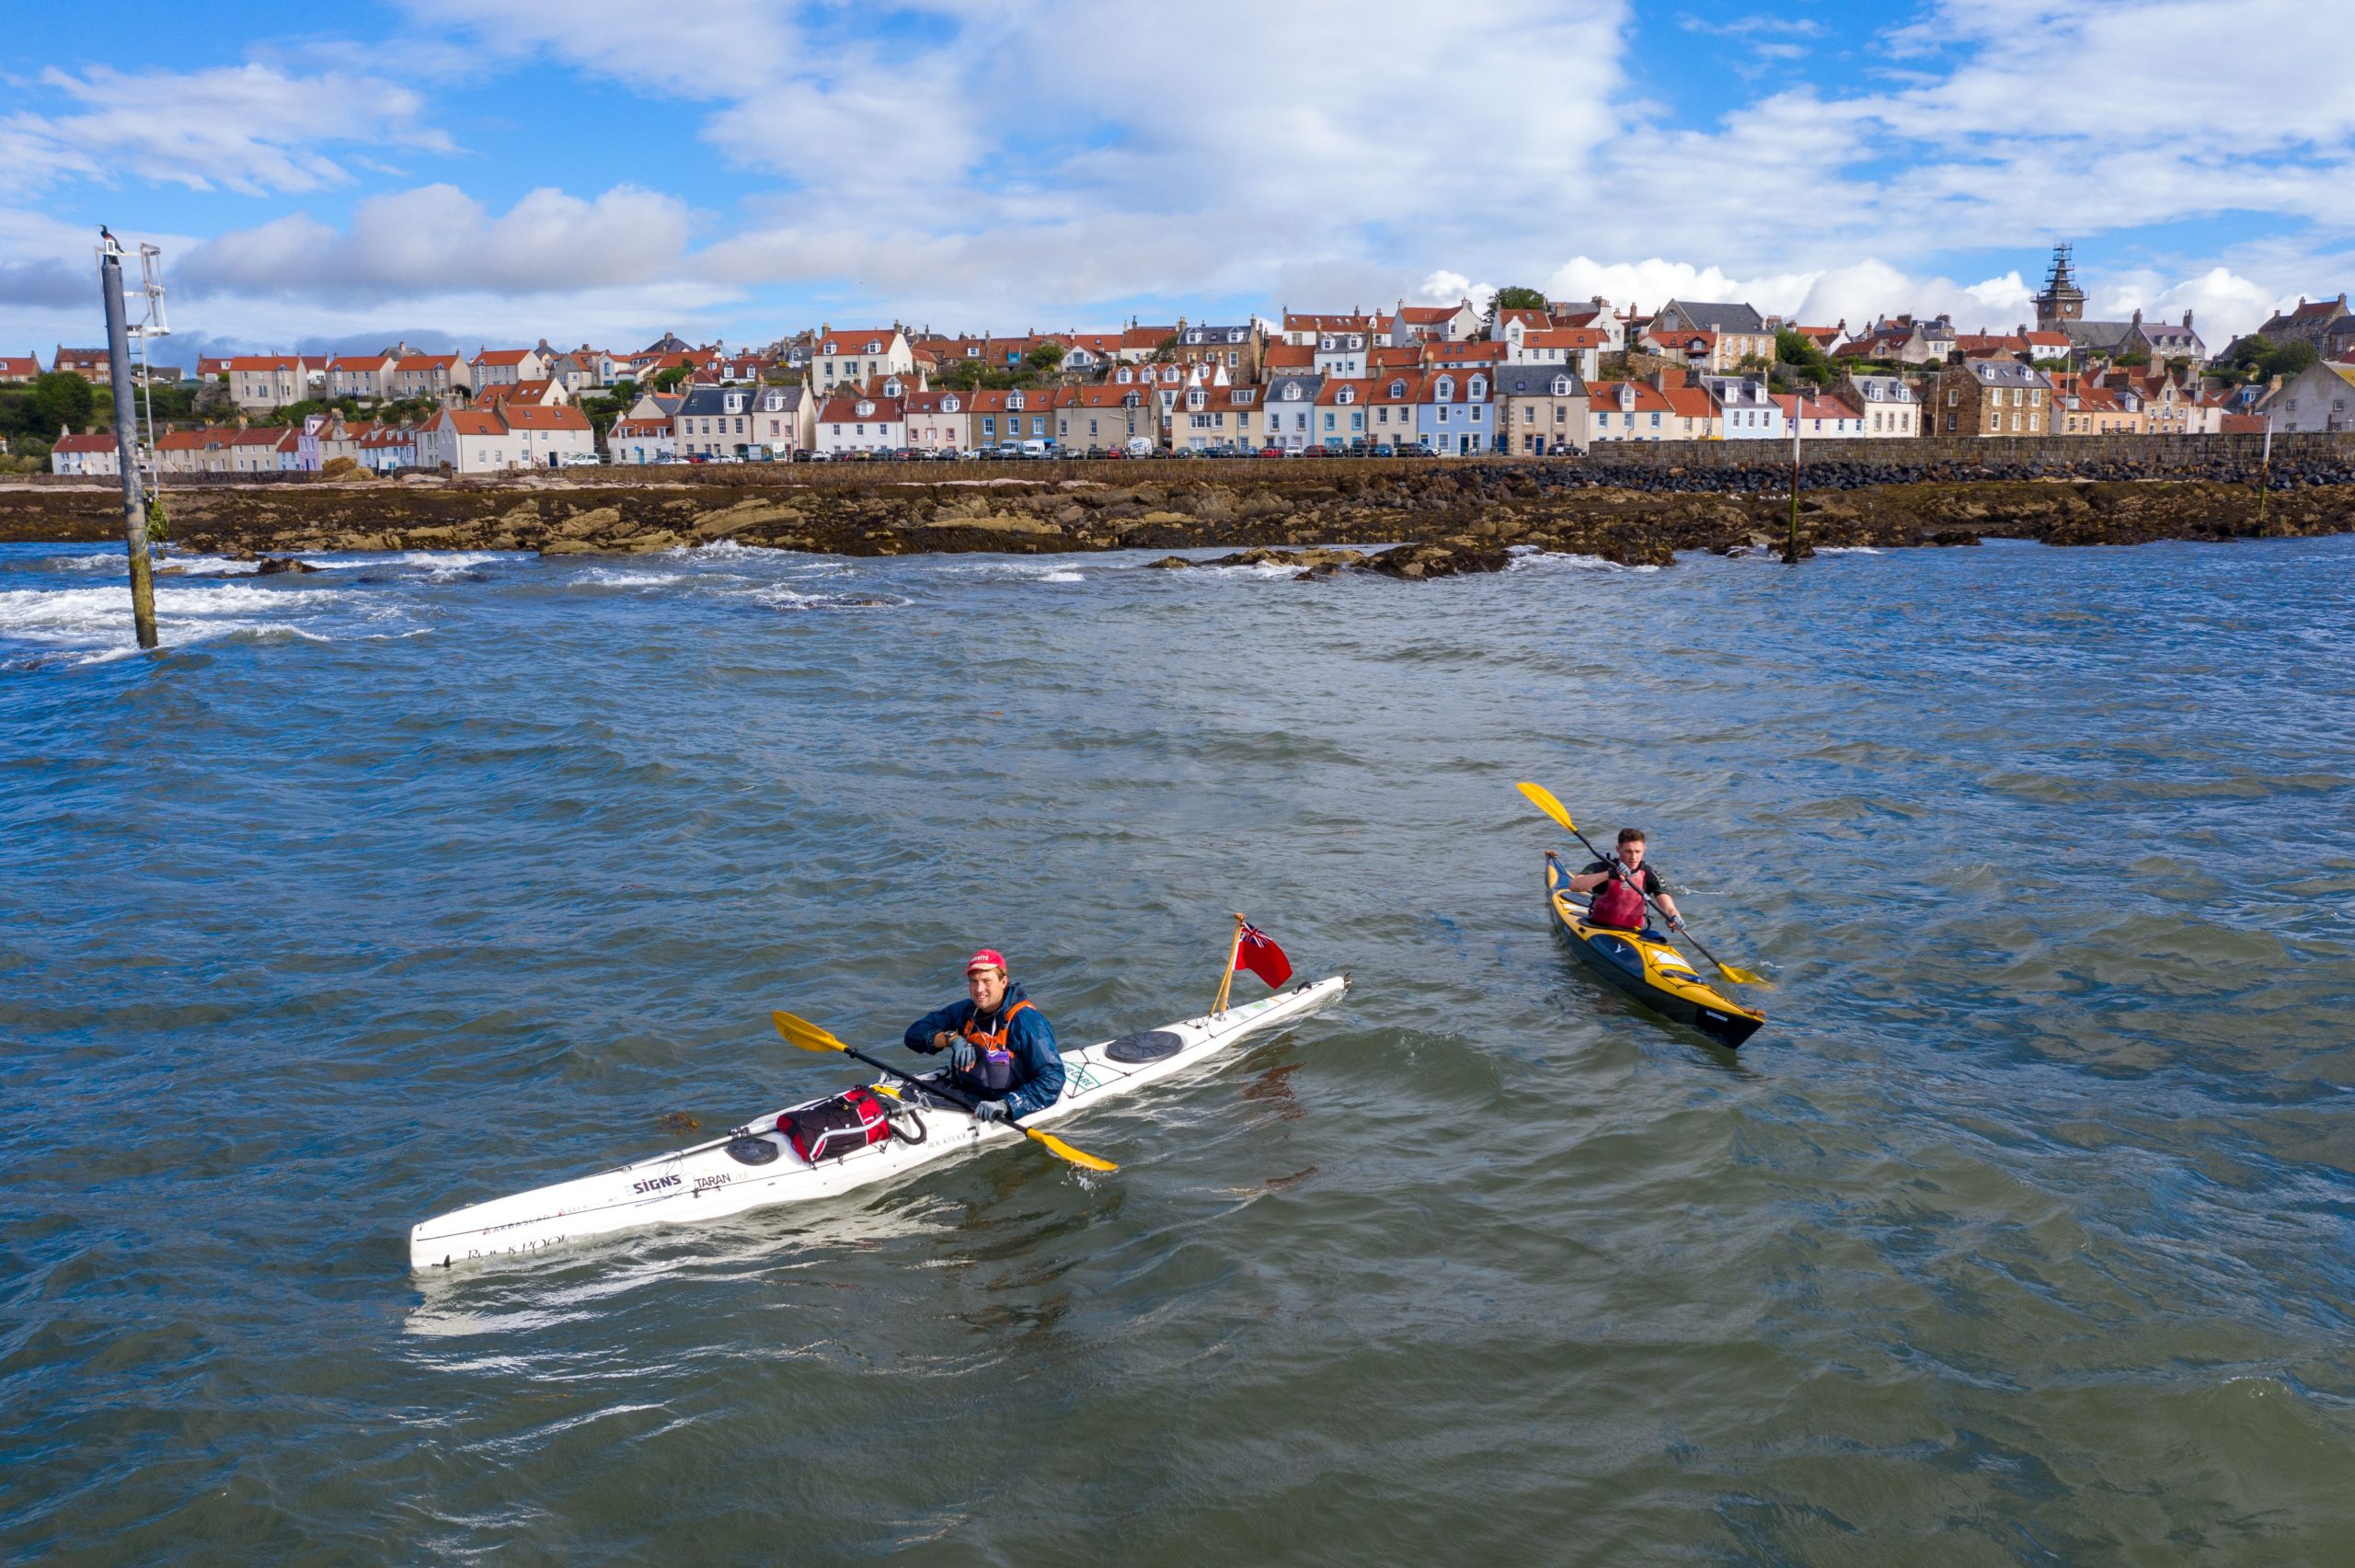 Jack Gatacre, 28, in the white kayak, and Antonio Vastano, 25, in the yellow kayak, set off from Pittenweem as part of their mammoth journey by kayak in aid of The Fishermen's Mission.